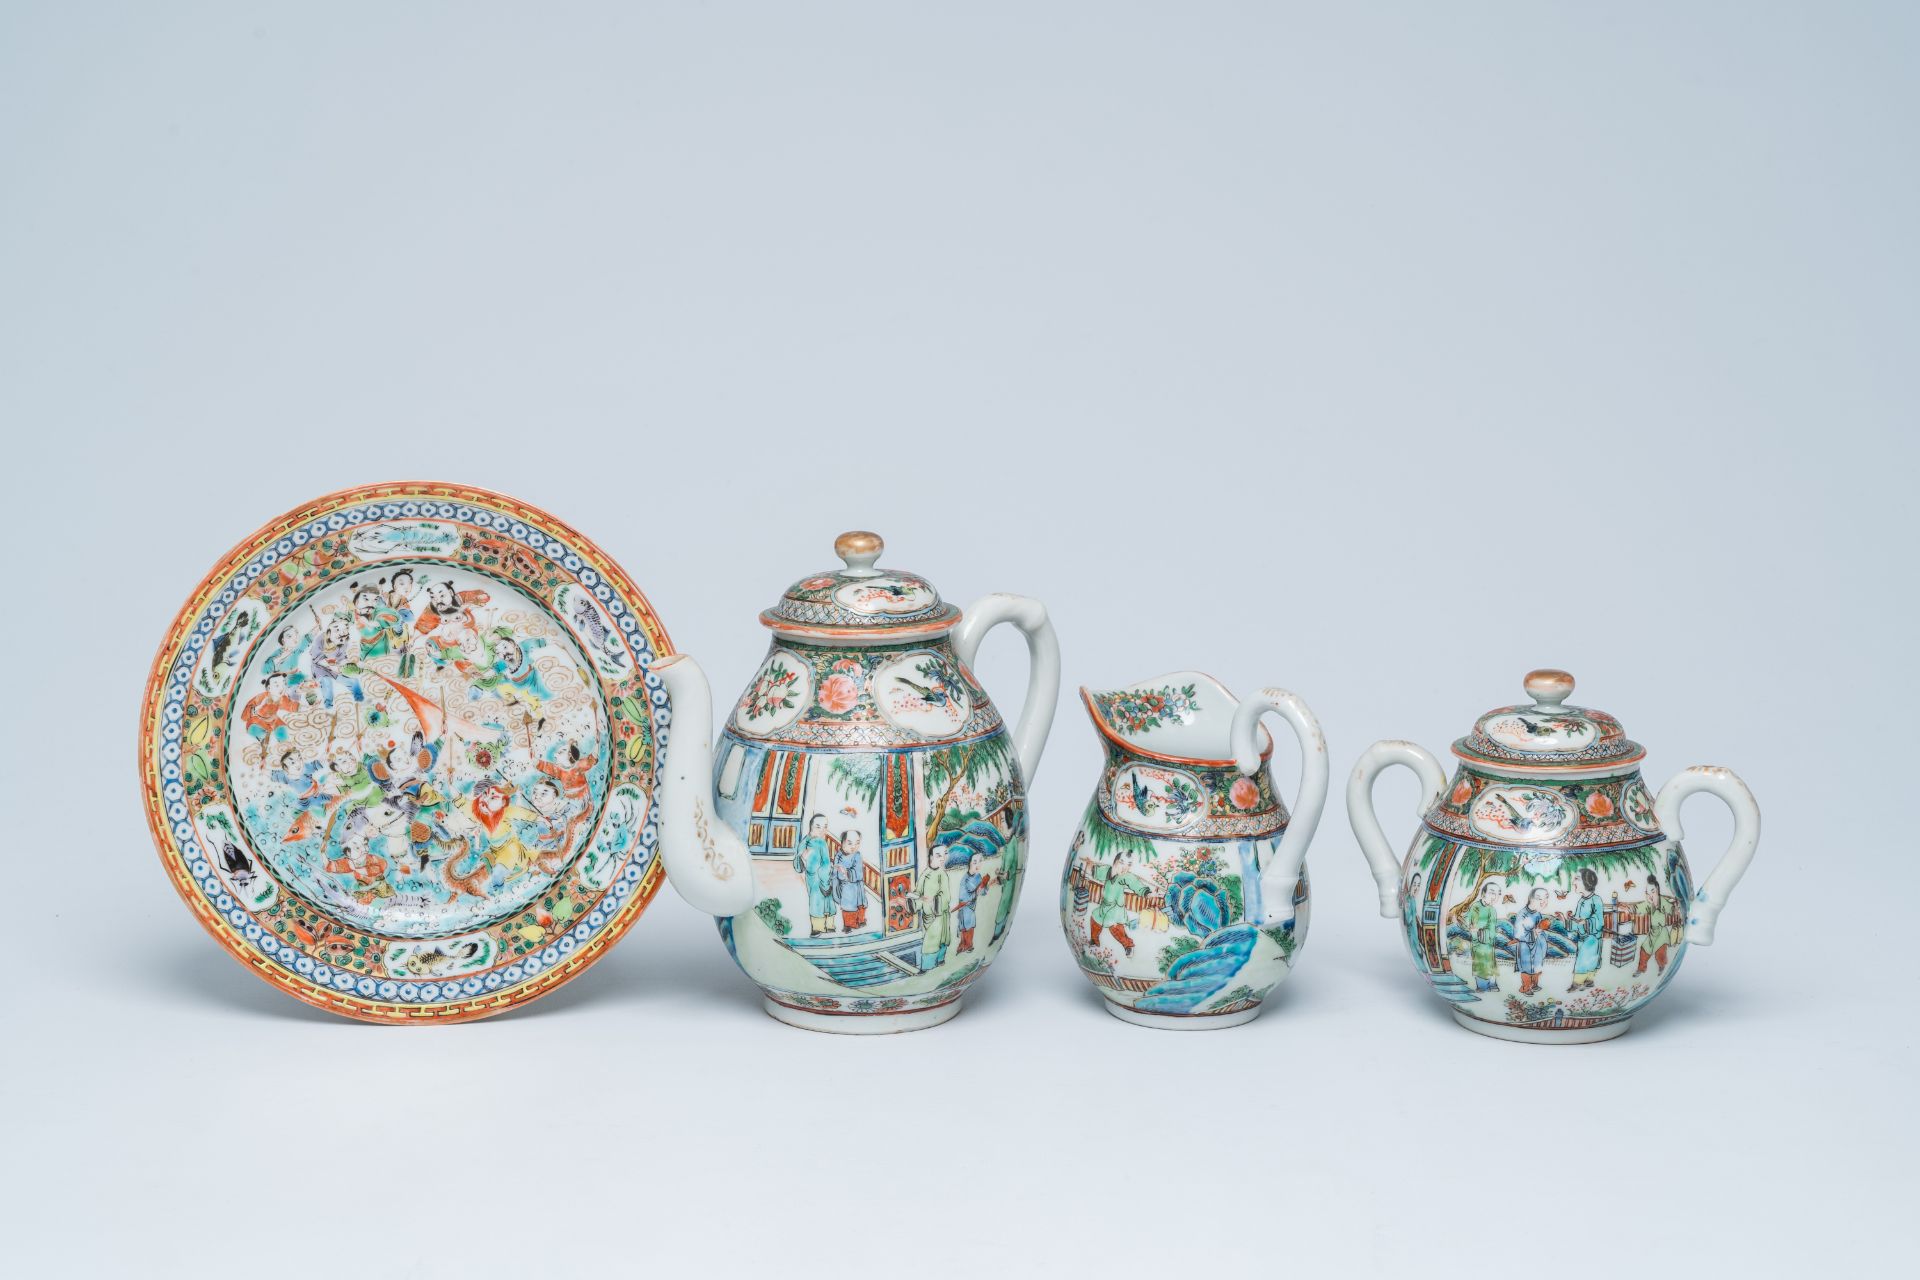 Two Chinese Canton famille verte jugs, a sugar bowl and a plate, 19th C.